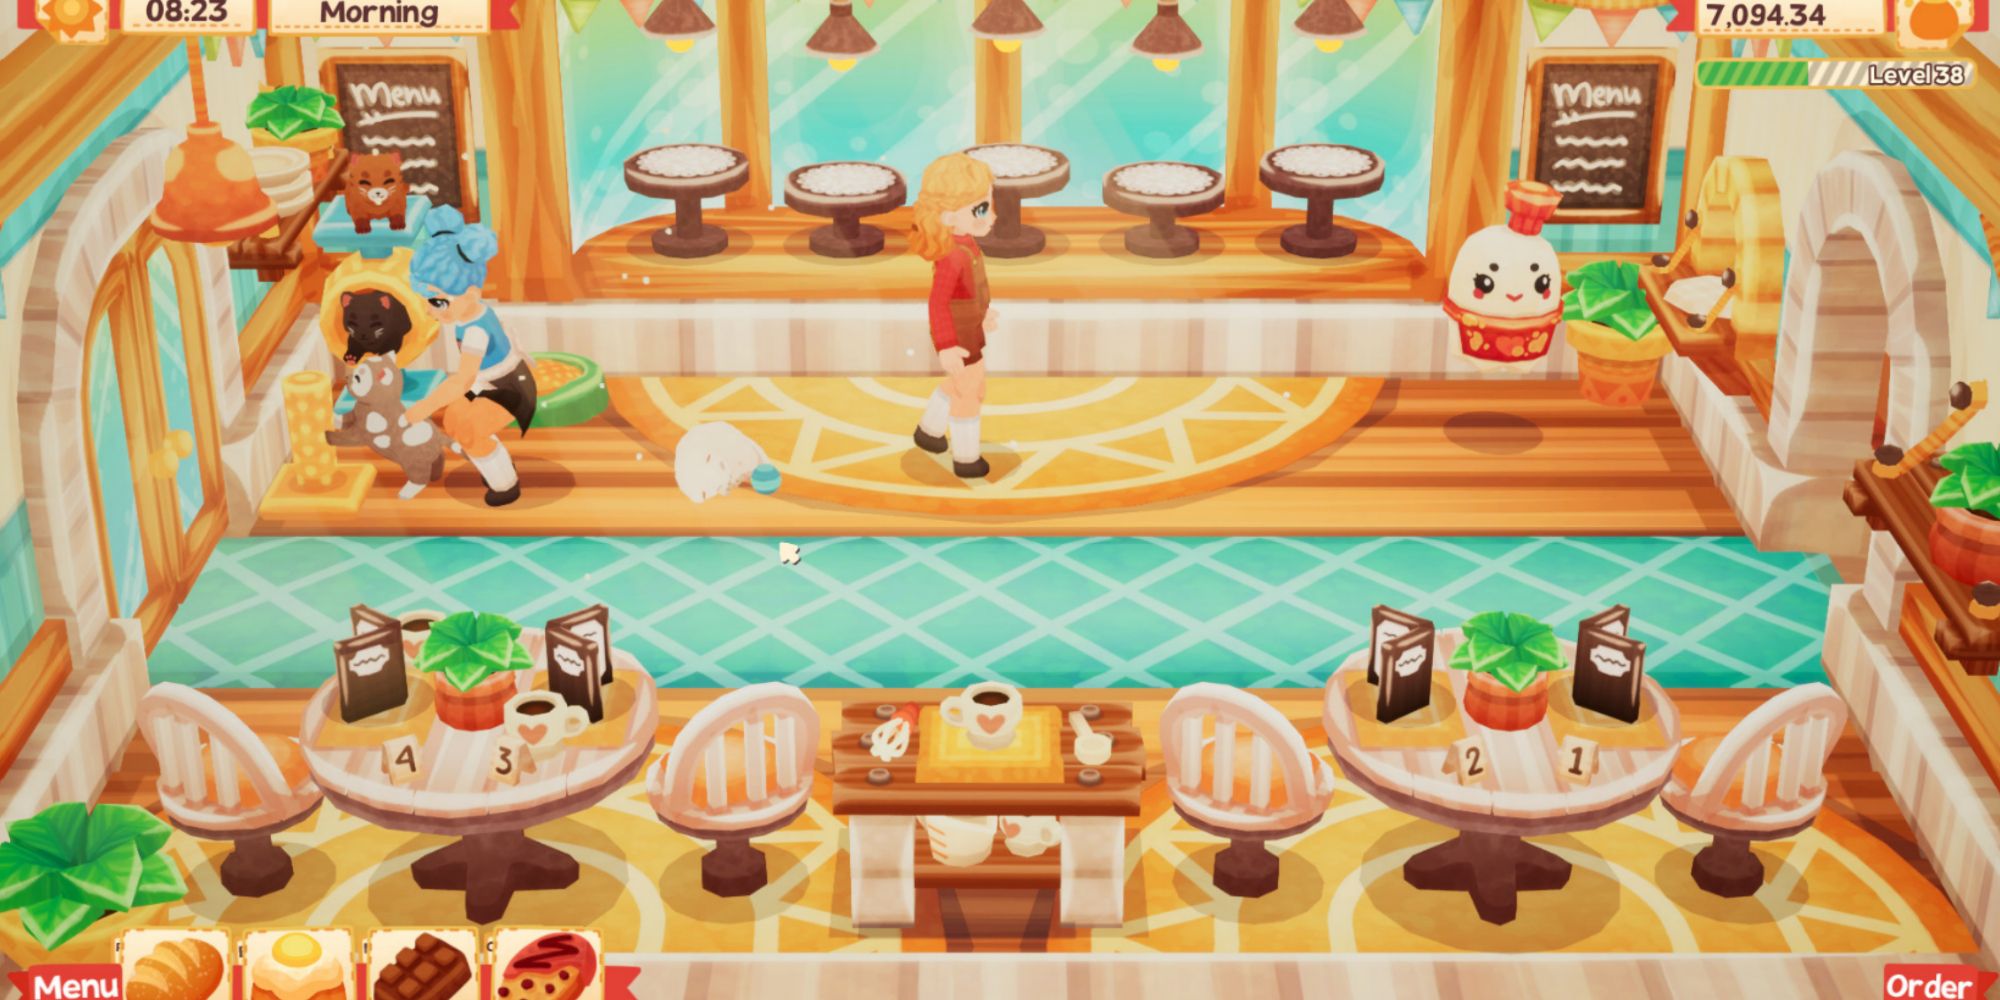 managing the cafe area of the bakery in lemoncake